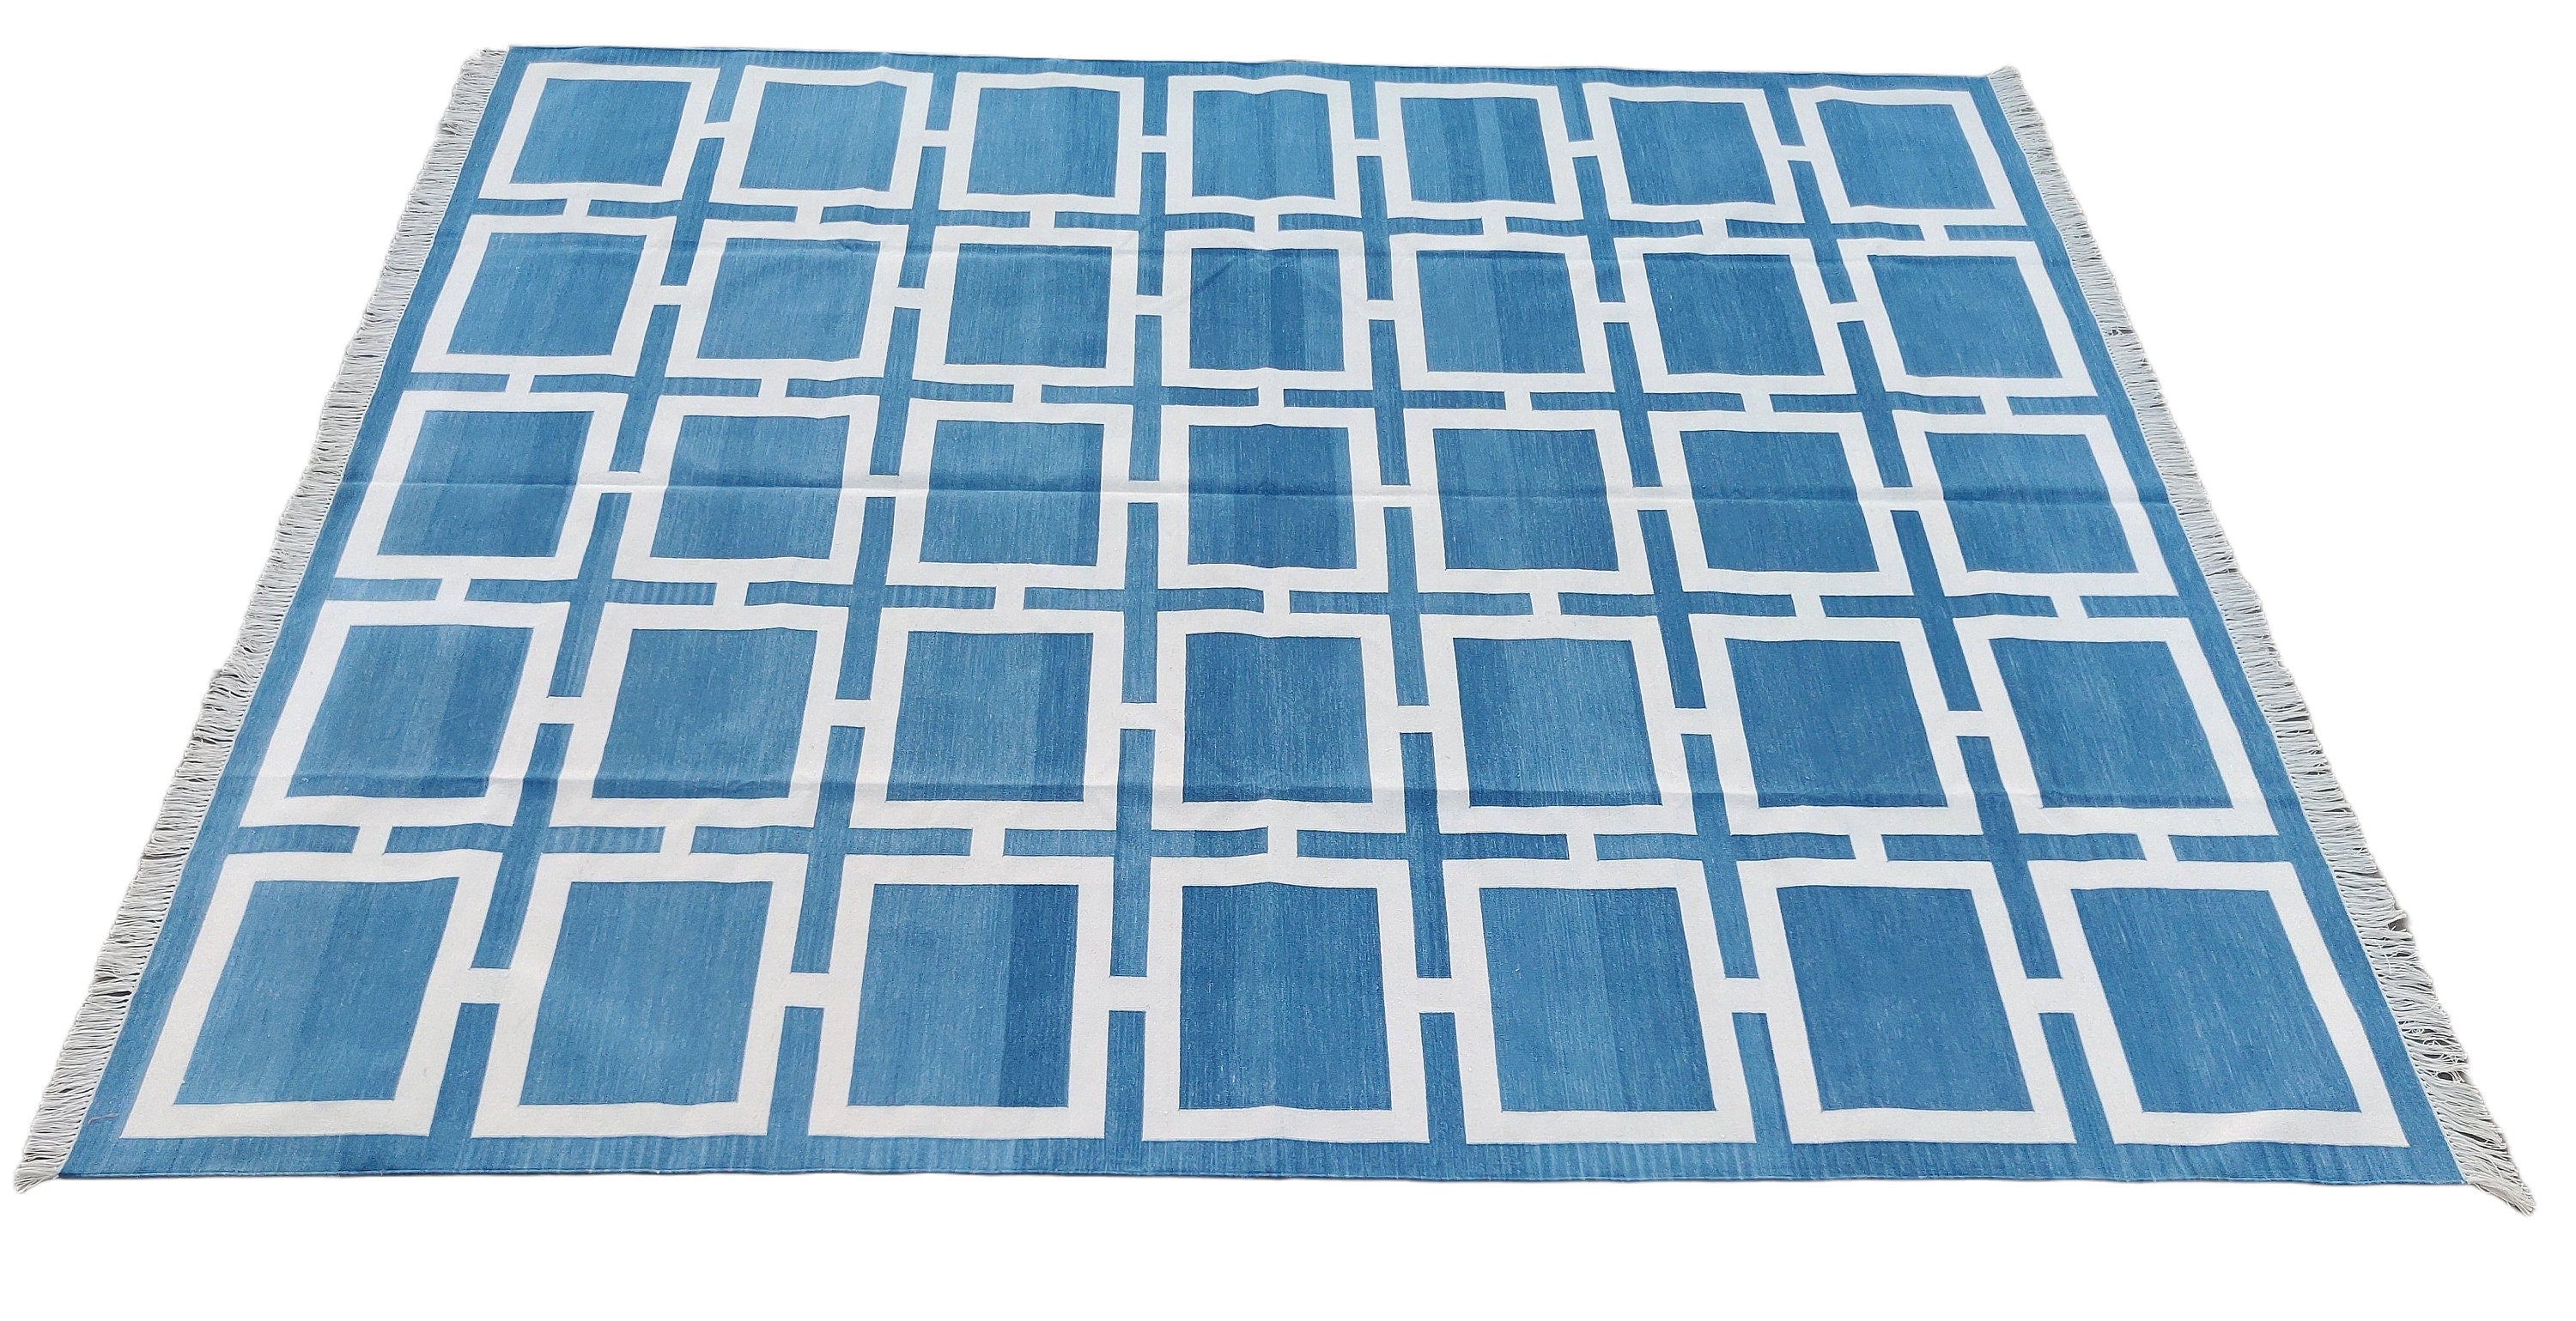 Modern Handmade Cotton Area Flat Weave Rug, Natural Vegetable Dyed, Blue & White Geometric Indian Dhurrie, Striped Kilim Rug, Wall Tapestry